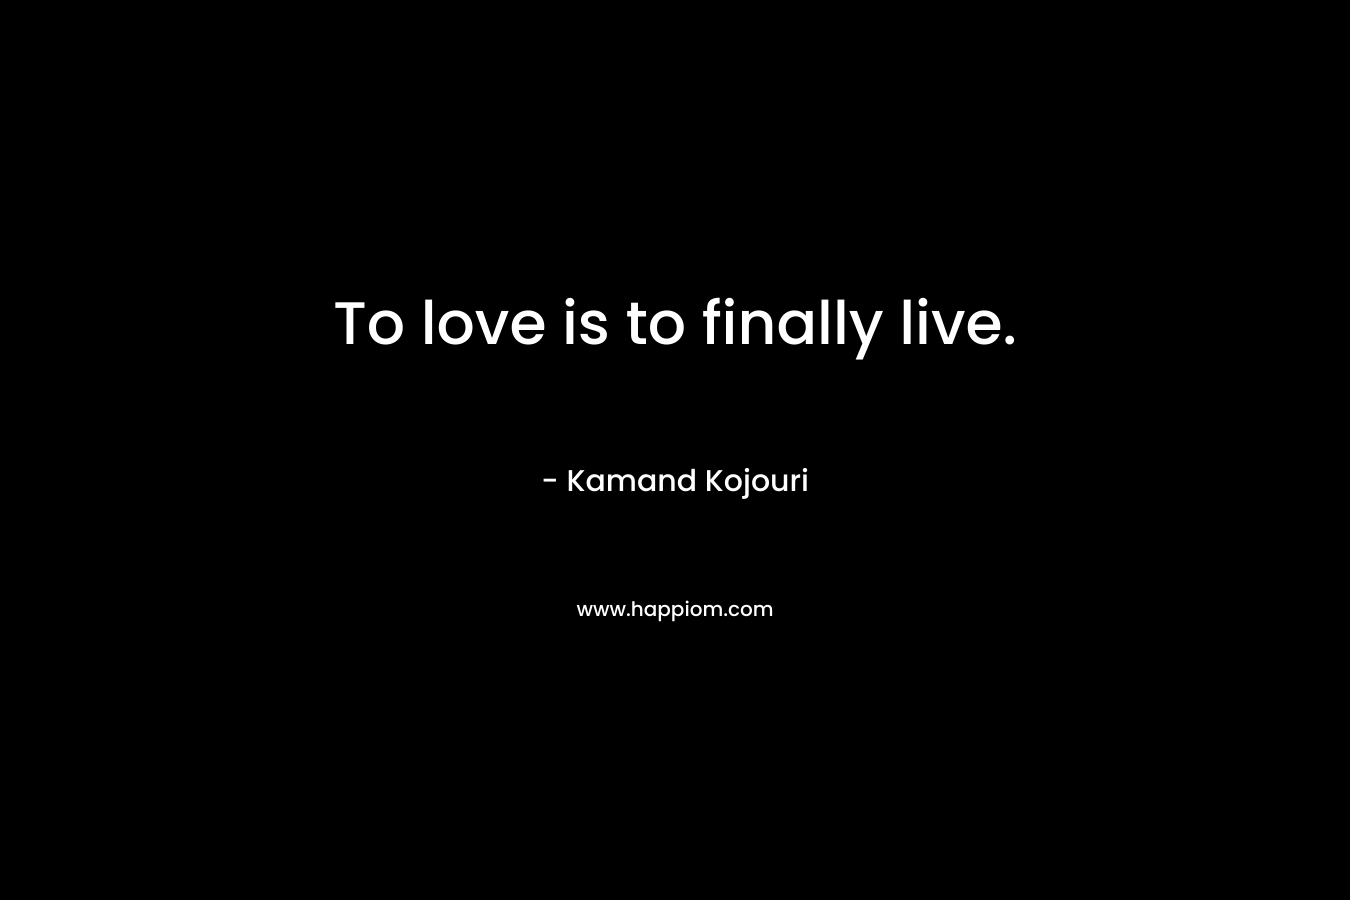 To love is to finally live.